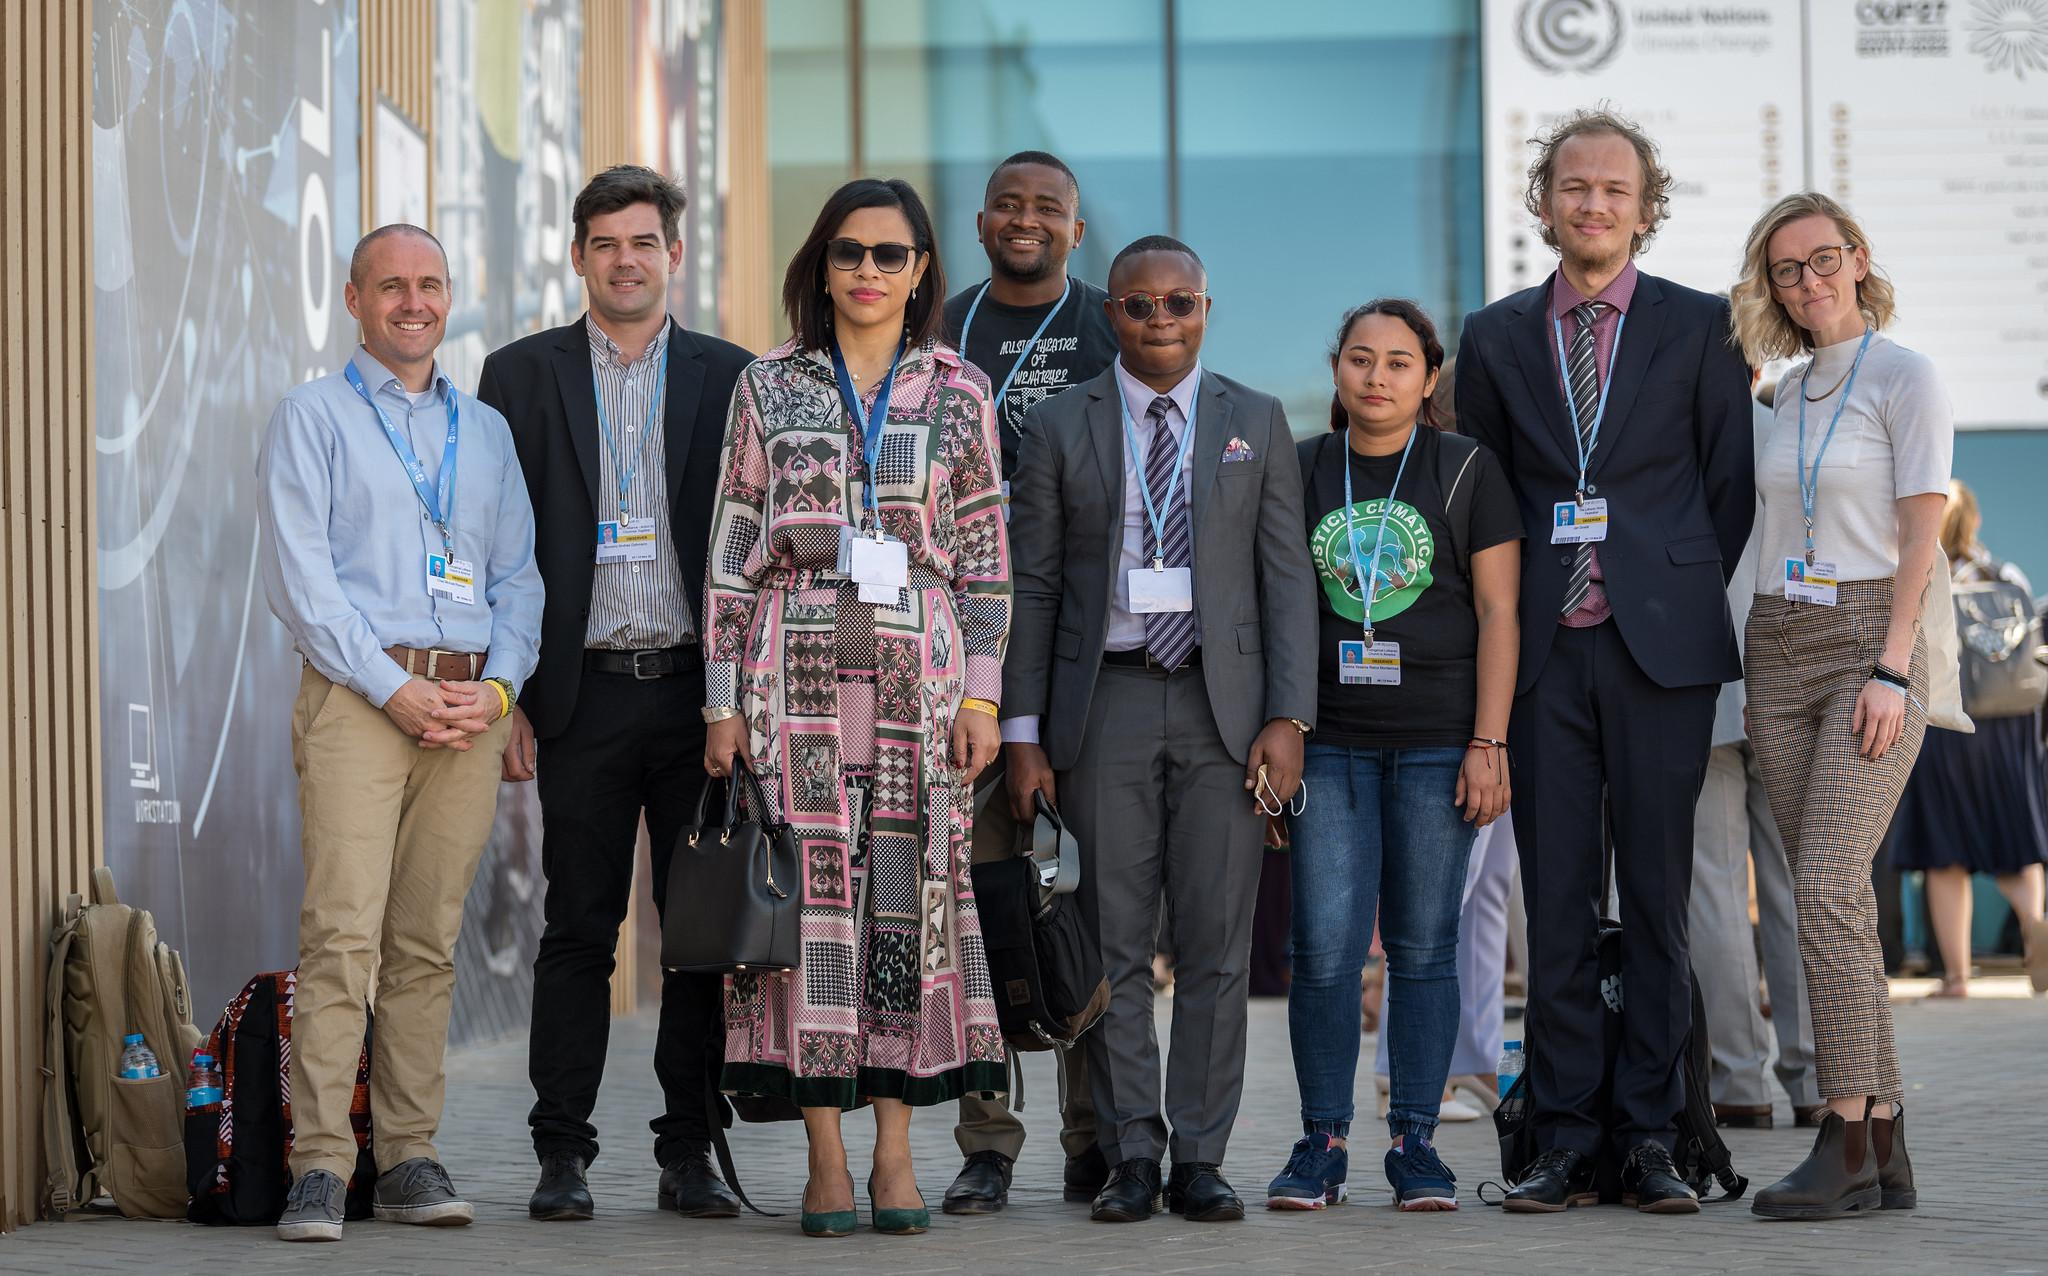 LWF delegates with Vahinala Raharinirina, director of the president’s cabinet of Madagascar, to reach out to the government to promote climate and social justice in the country.